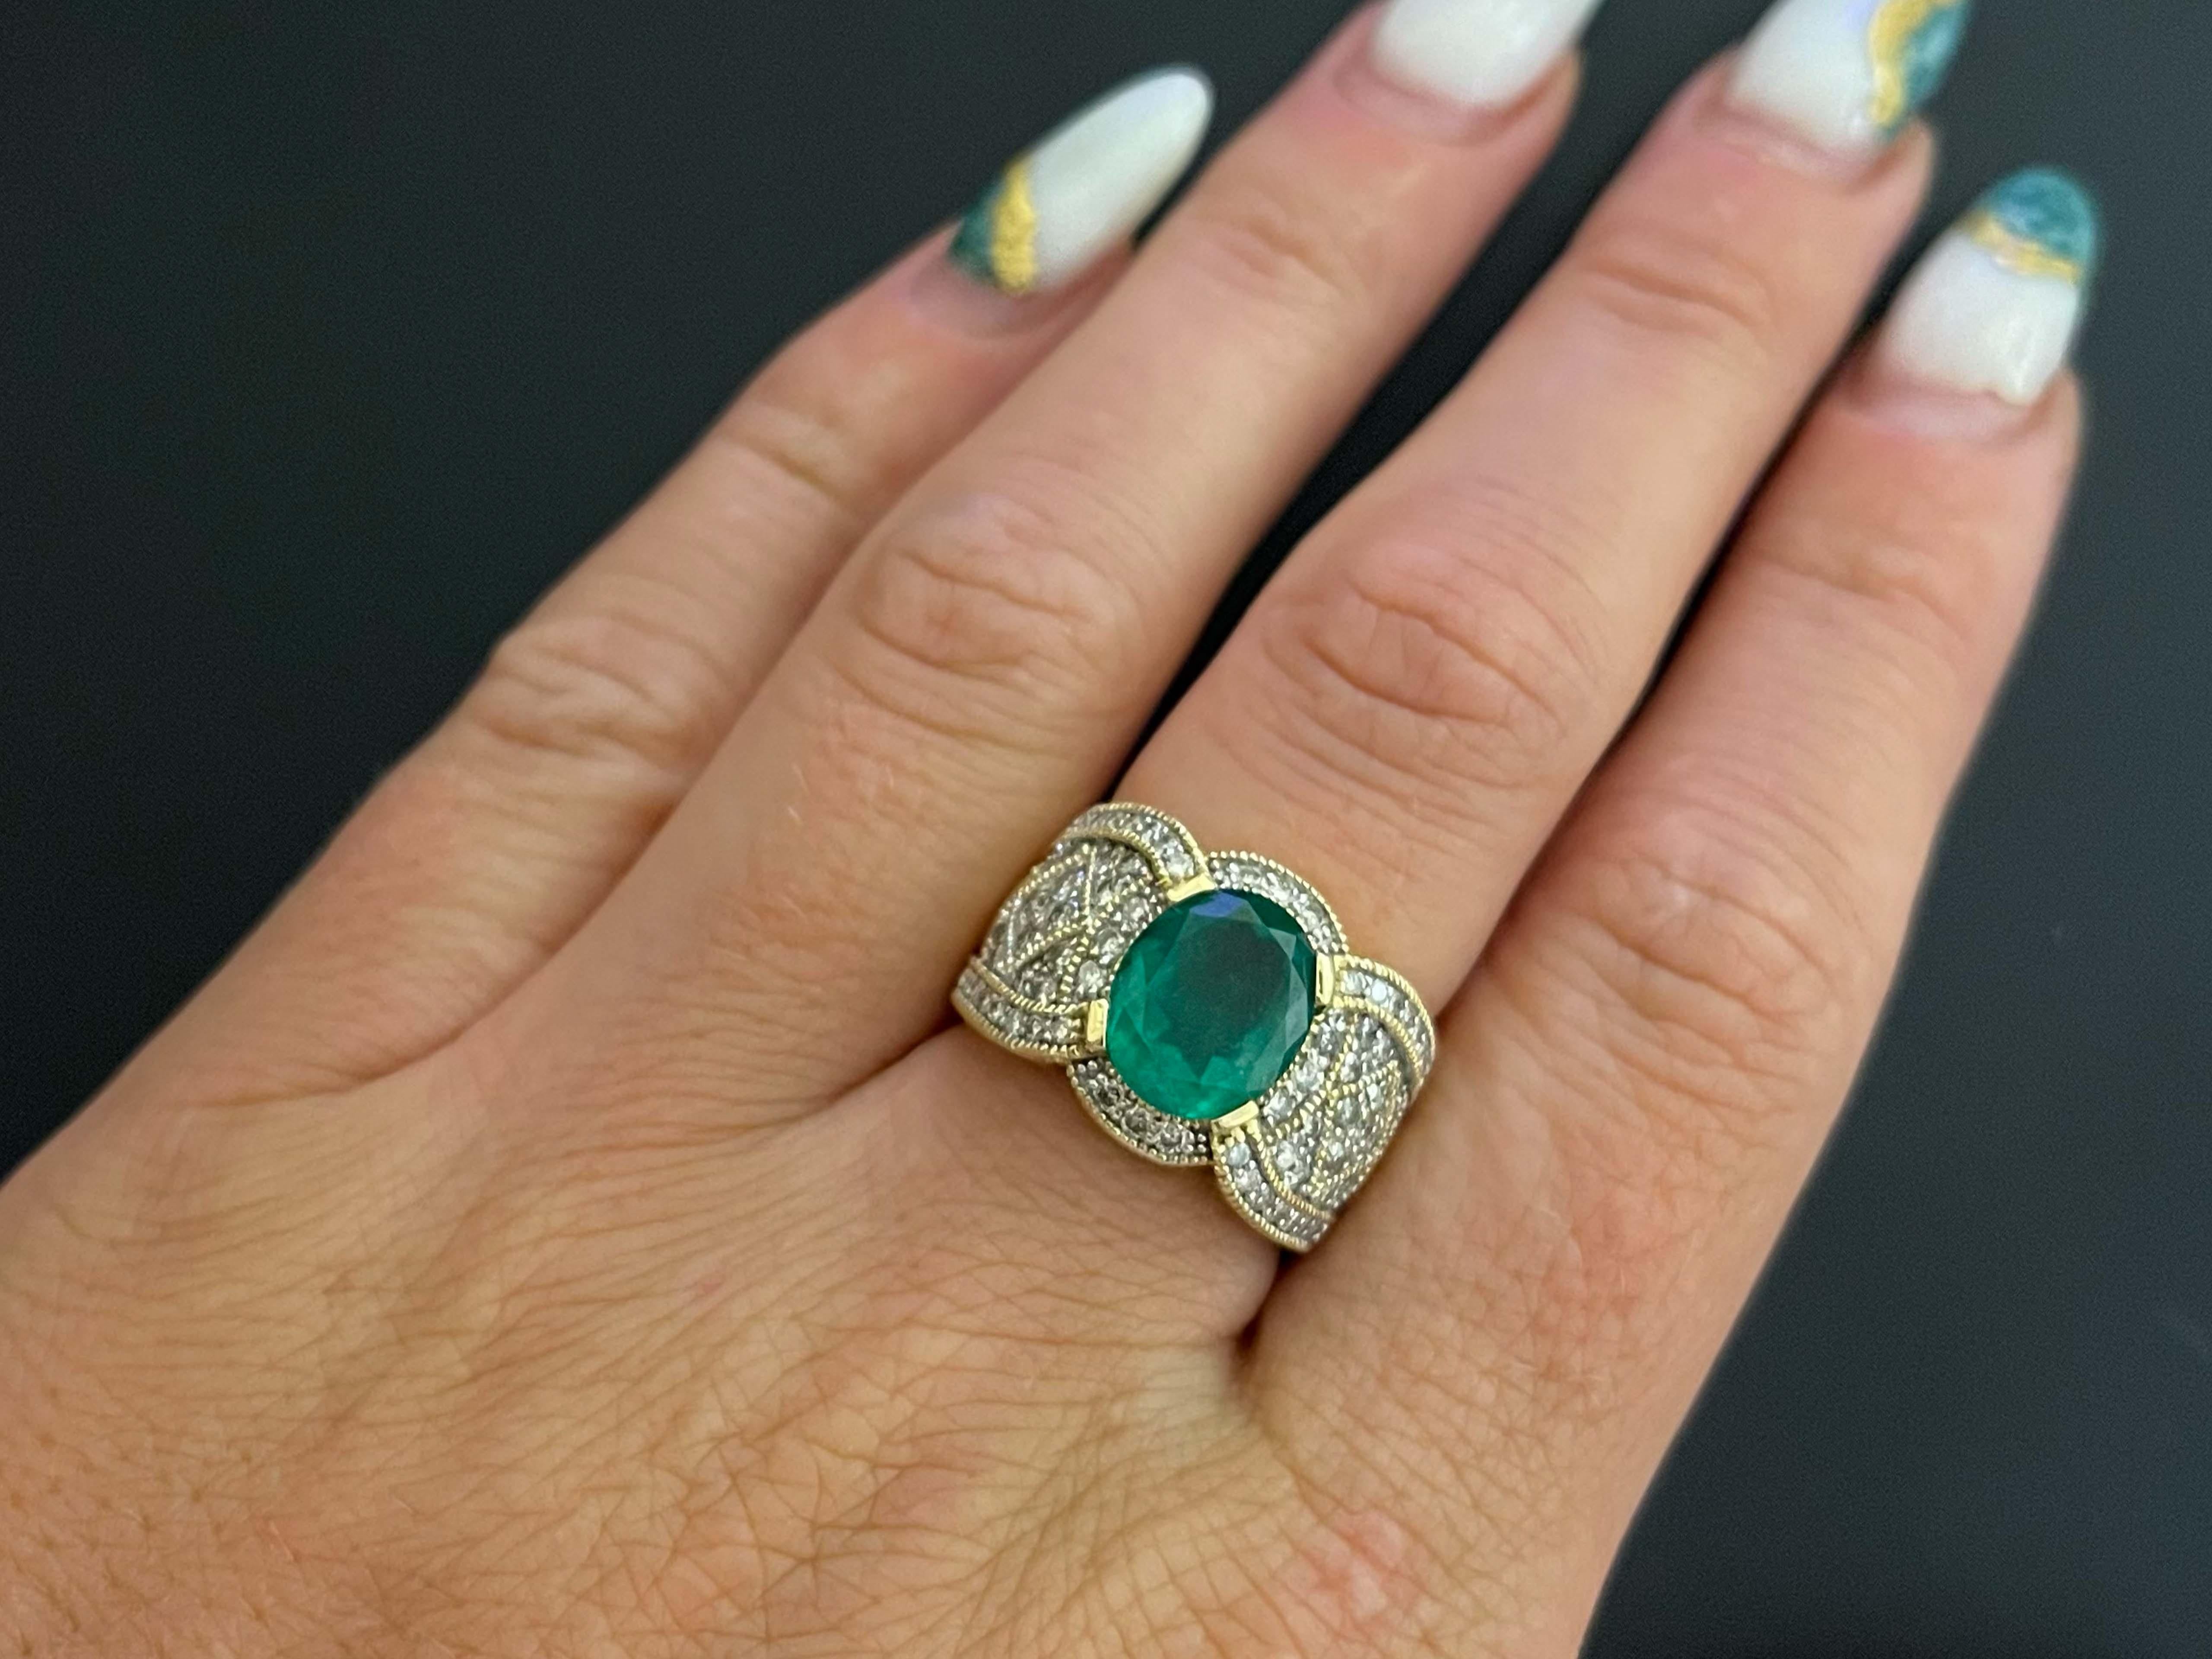 GIA Rare 2.65 ct. Colombian Emerald & Diamond Cigar Band Ring in 14k Yellow Gold. This stunning ring features a 2.65 oval, brilliant cut, transparent Colombian green Emerald, surrounded by a gorgeous diamond halo. The Colombian Emerald is